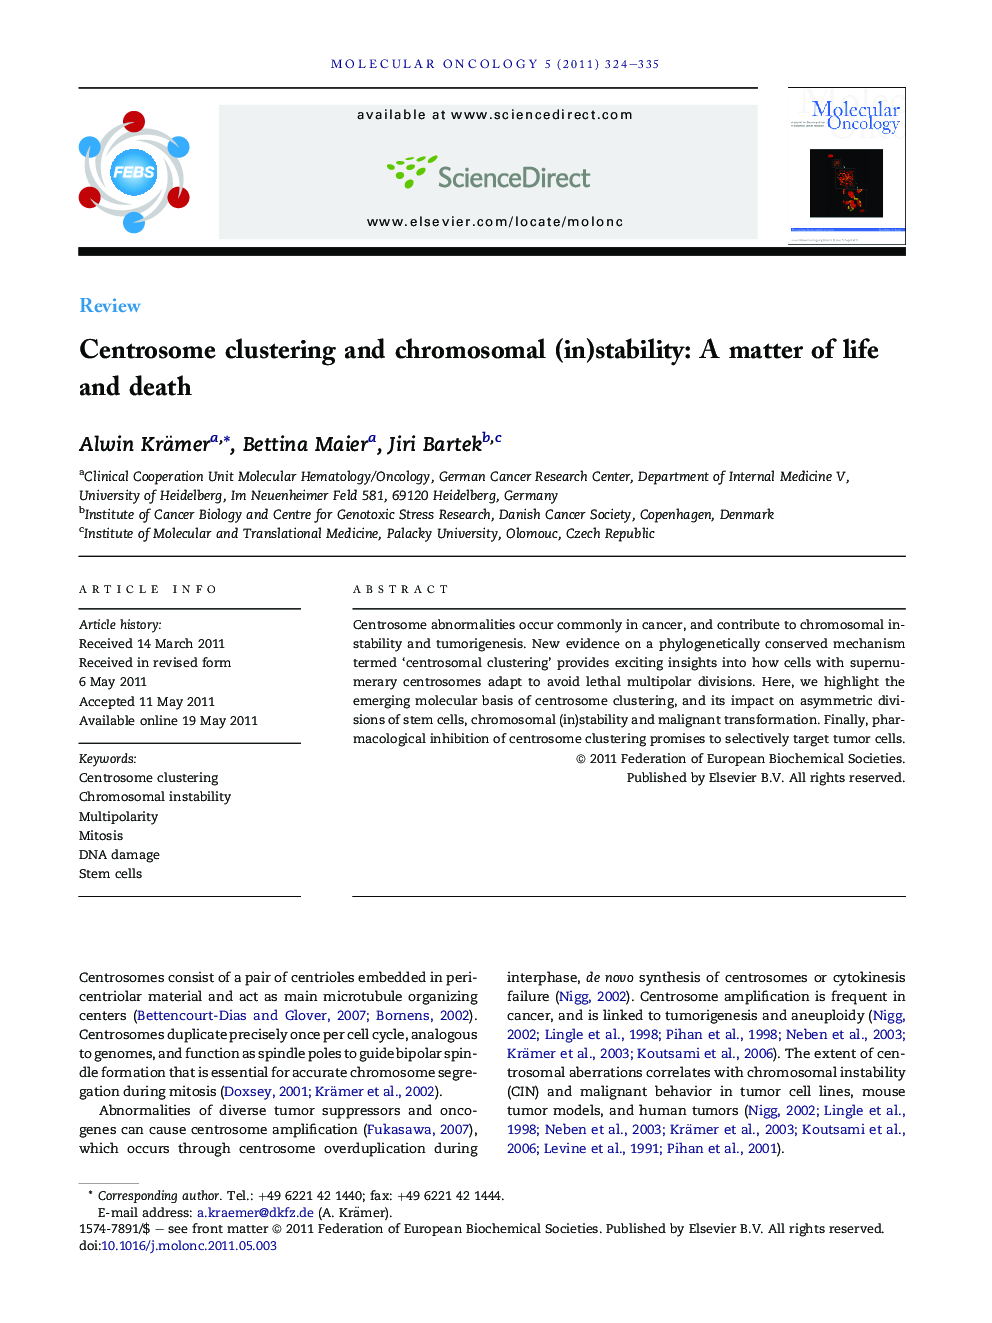 Centrosome clustering and chromosomal (in)stability: A matter of life and death